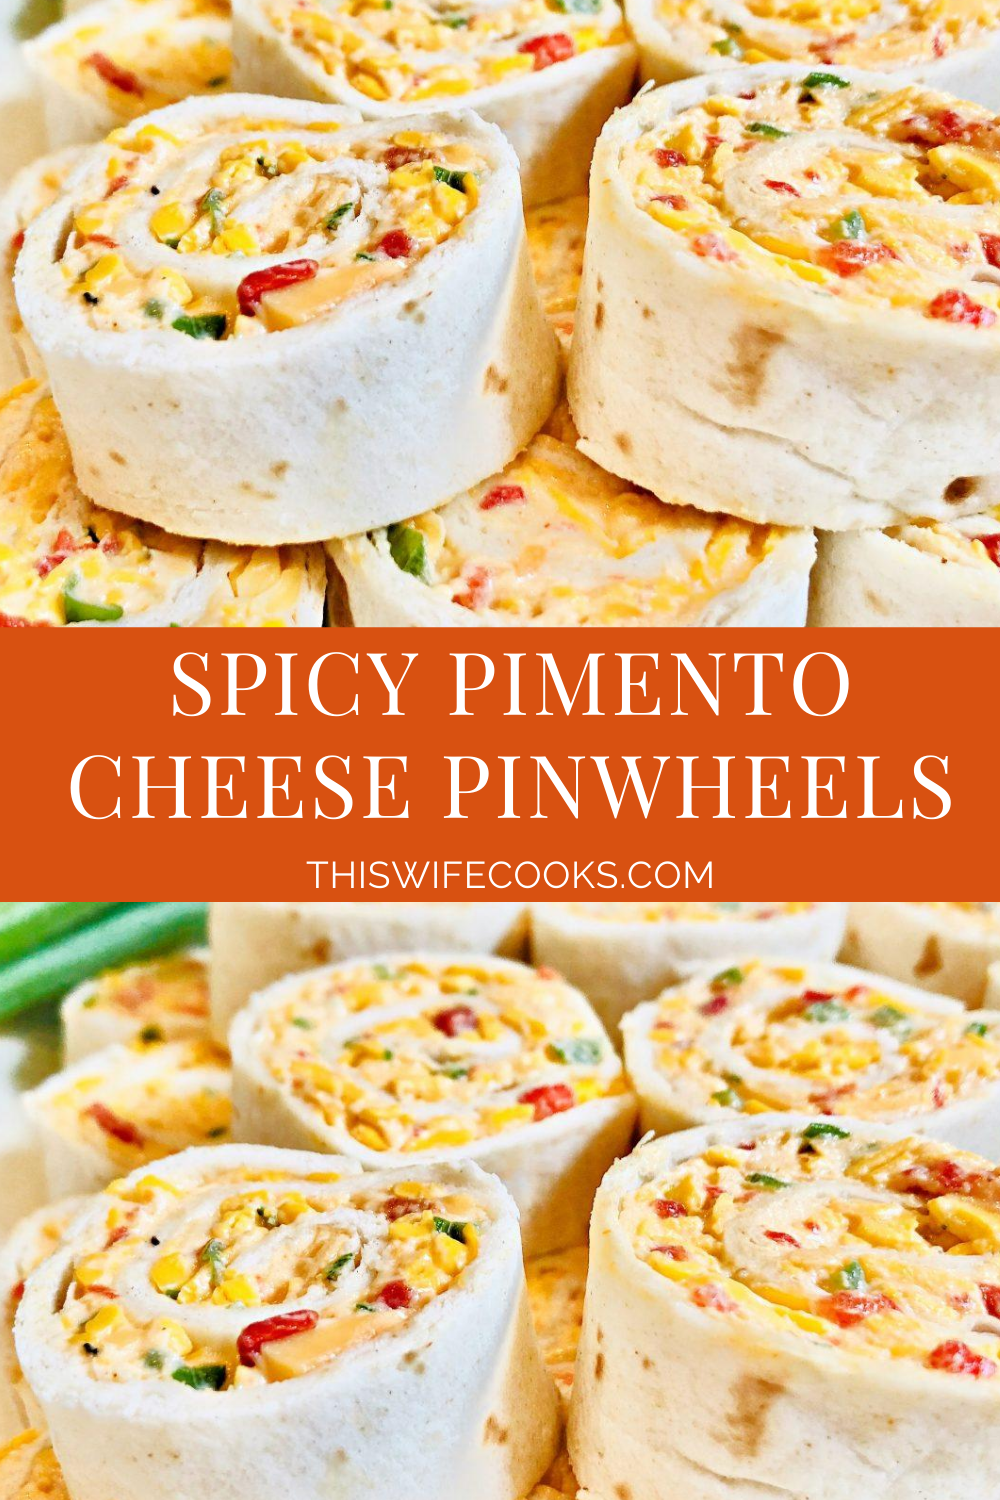 Pimento Cheese Pinwheels are easy to make, and perfect for parties, potlucks, & tailgating! Make ahead and refrigerate until ready to serve. via @thiswifecooks